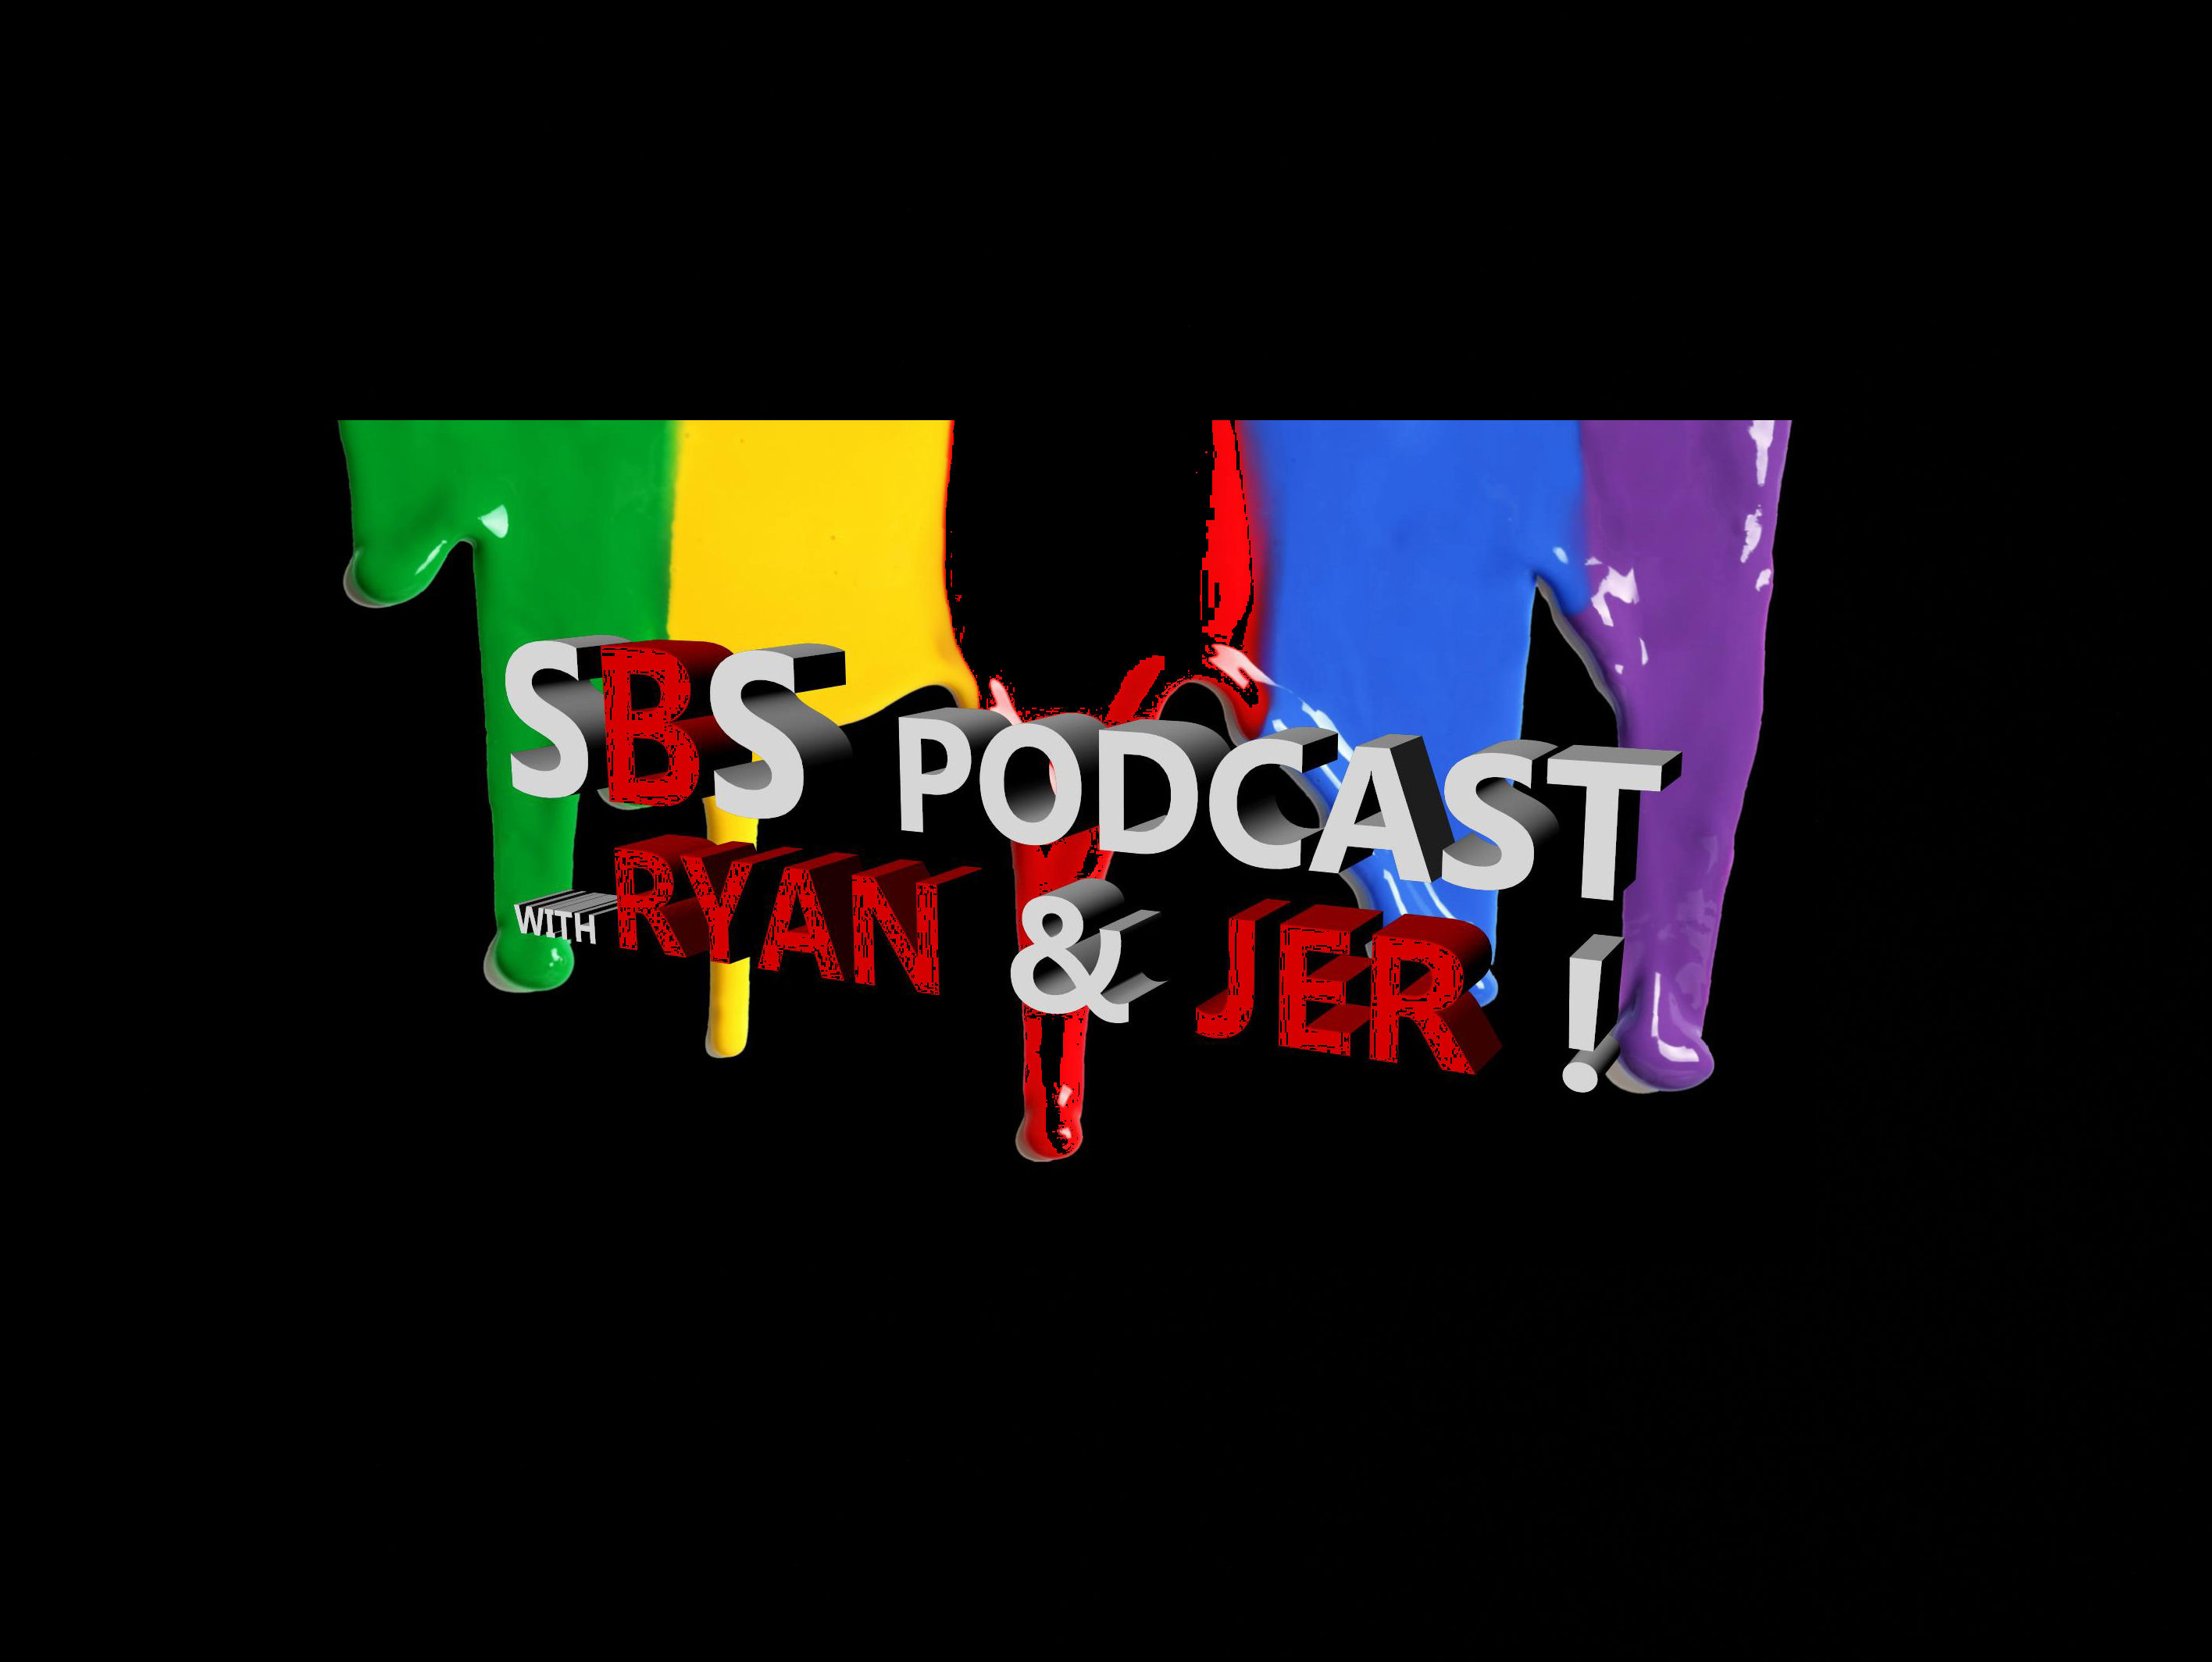  SBS Podcast With Ryan & Jer 006